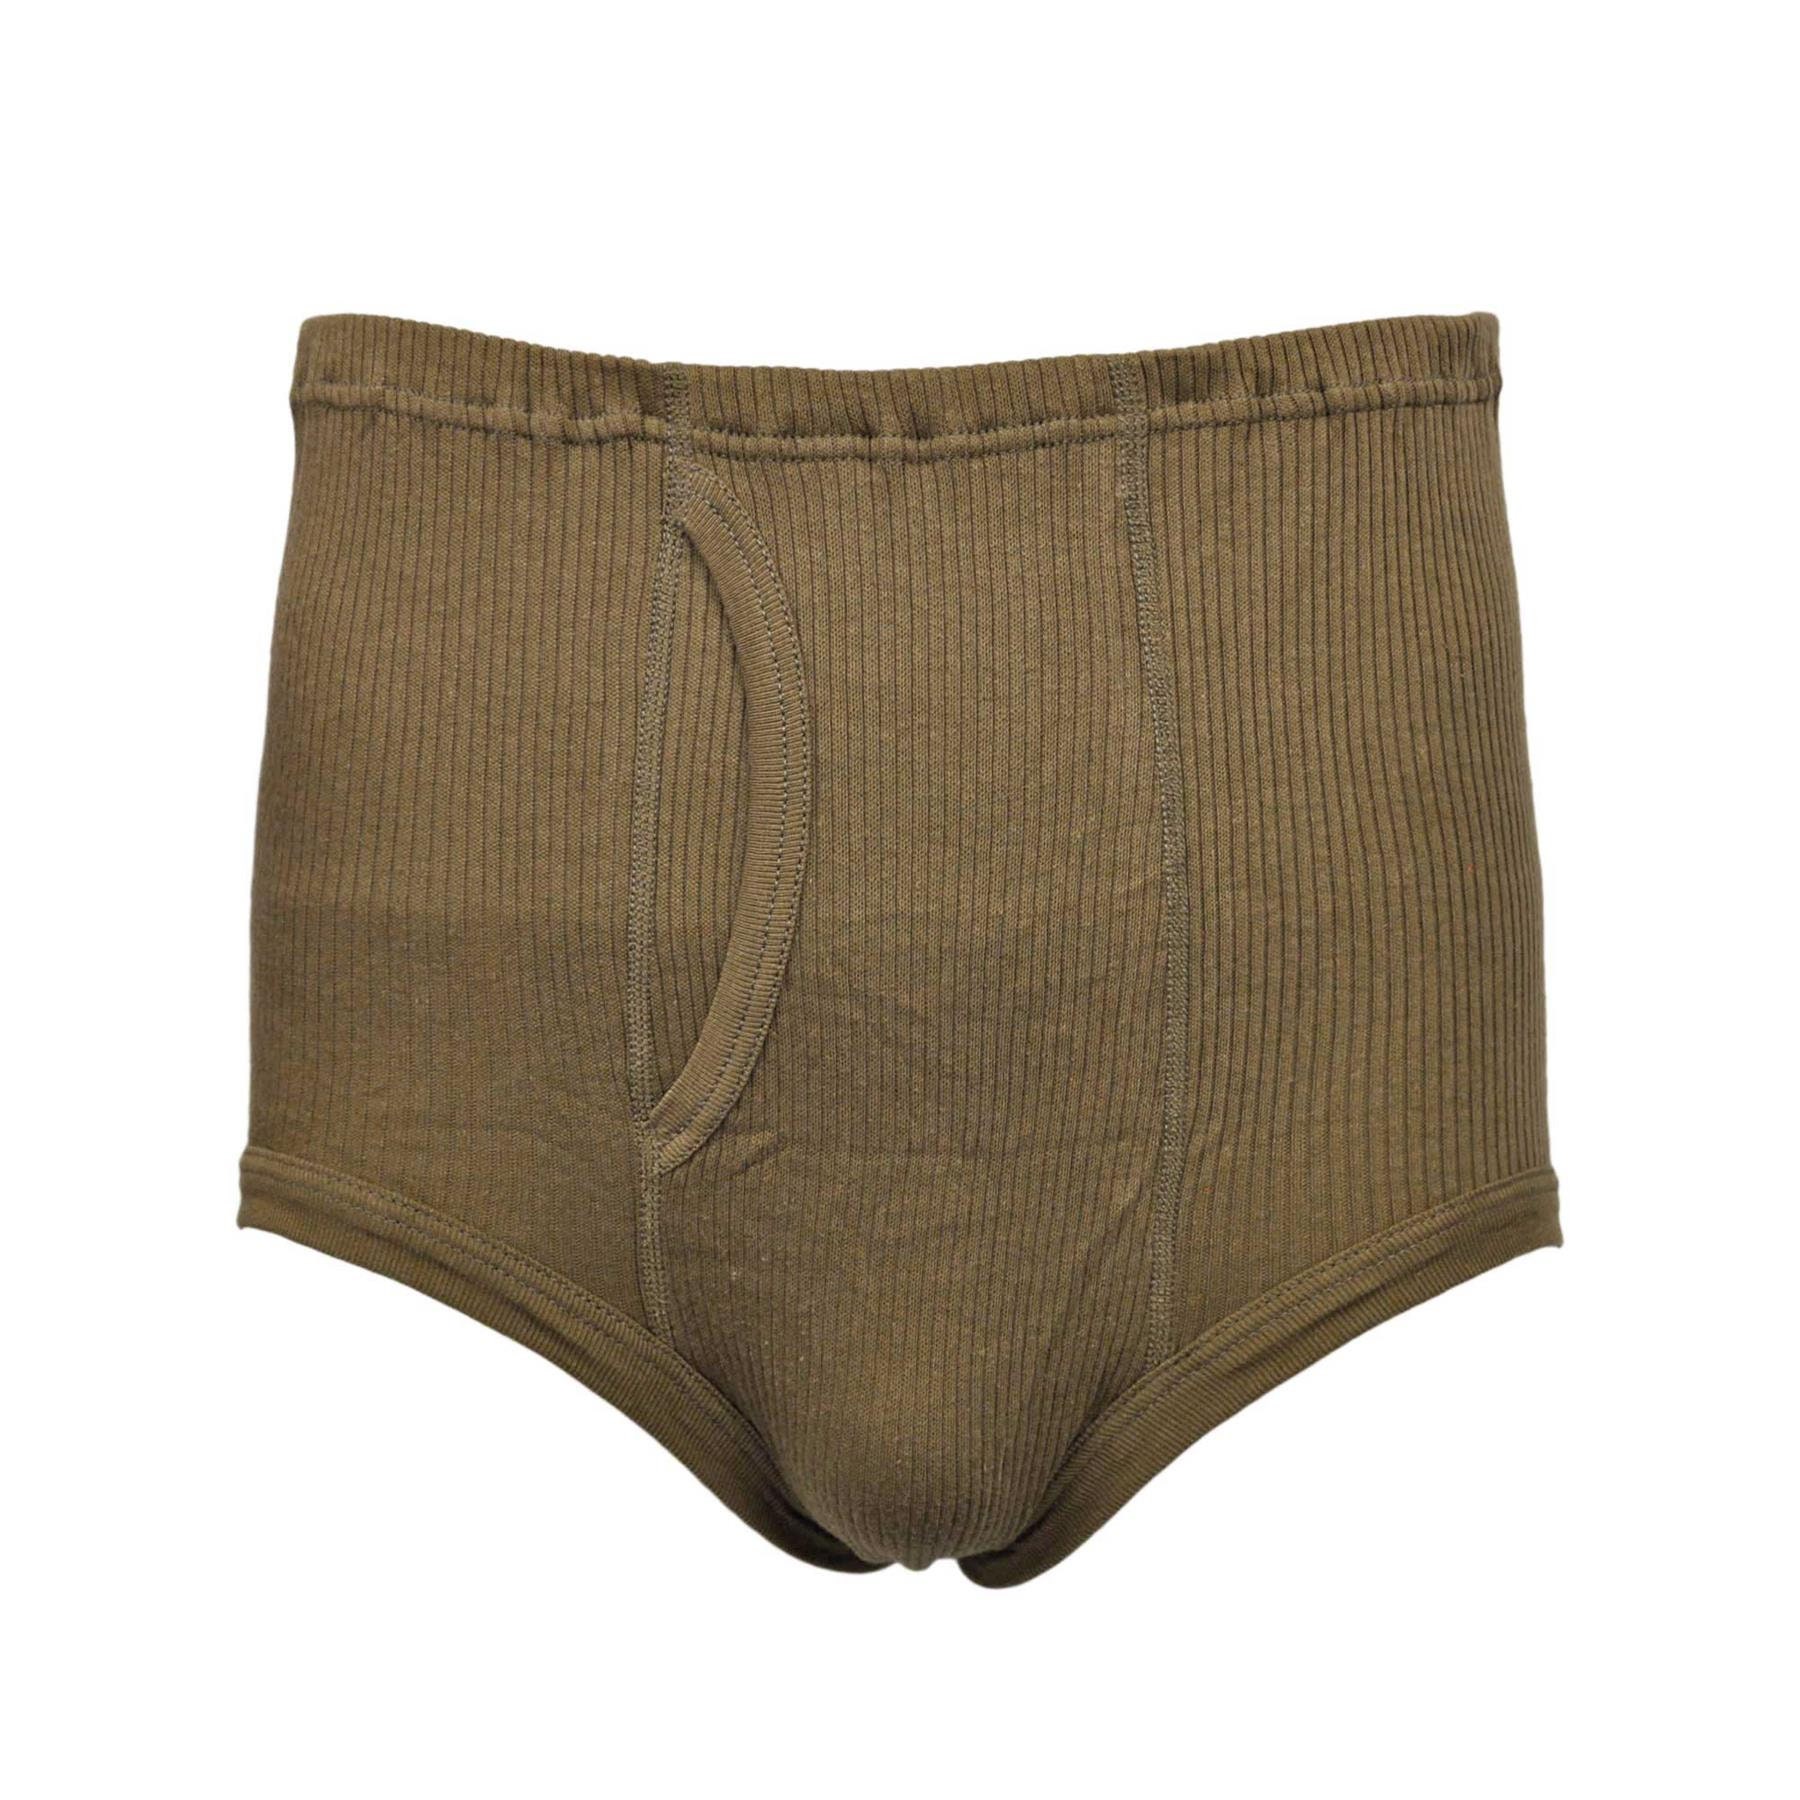 Brief Underwear Organic Cotton Butter Knit Fabric Made in the USA